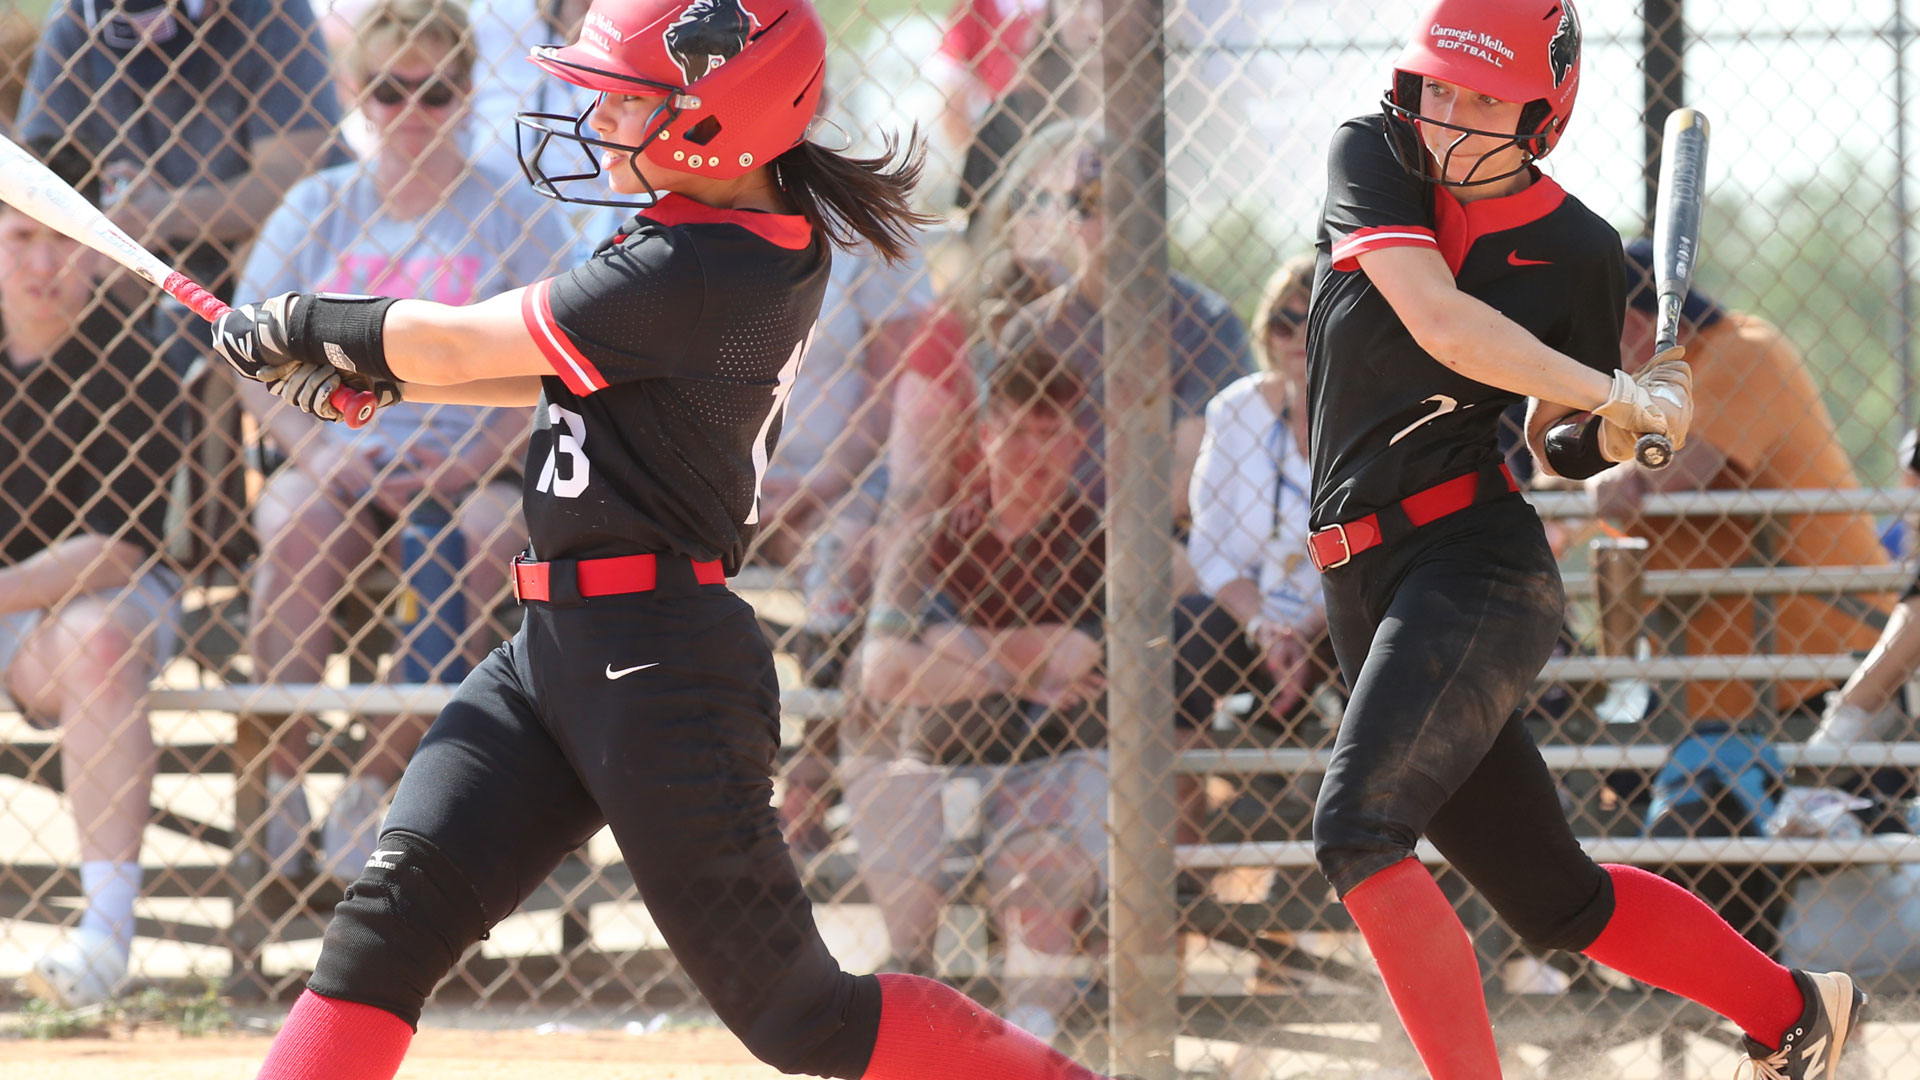 split action image of two different softball players swinging a bat